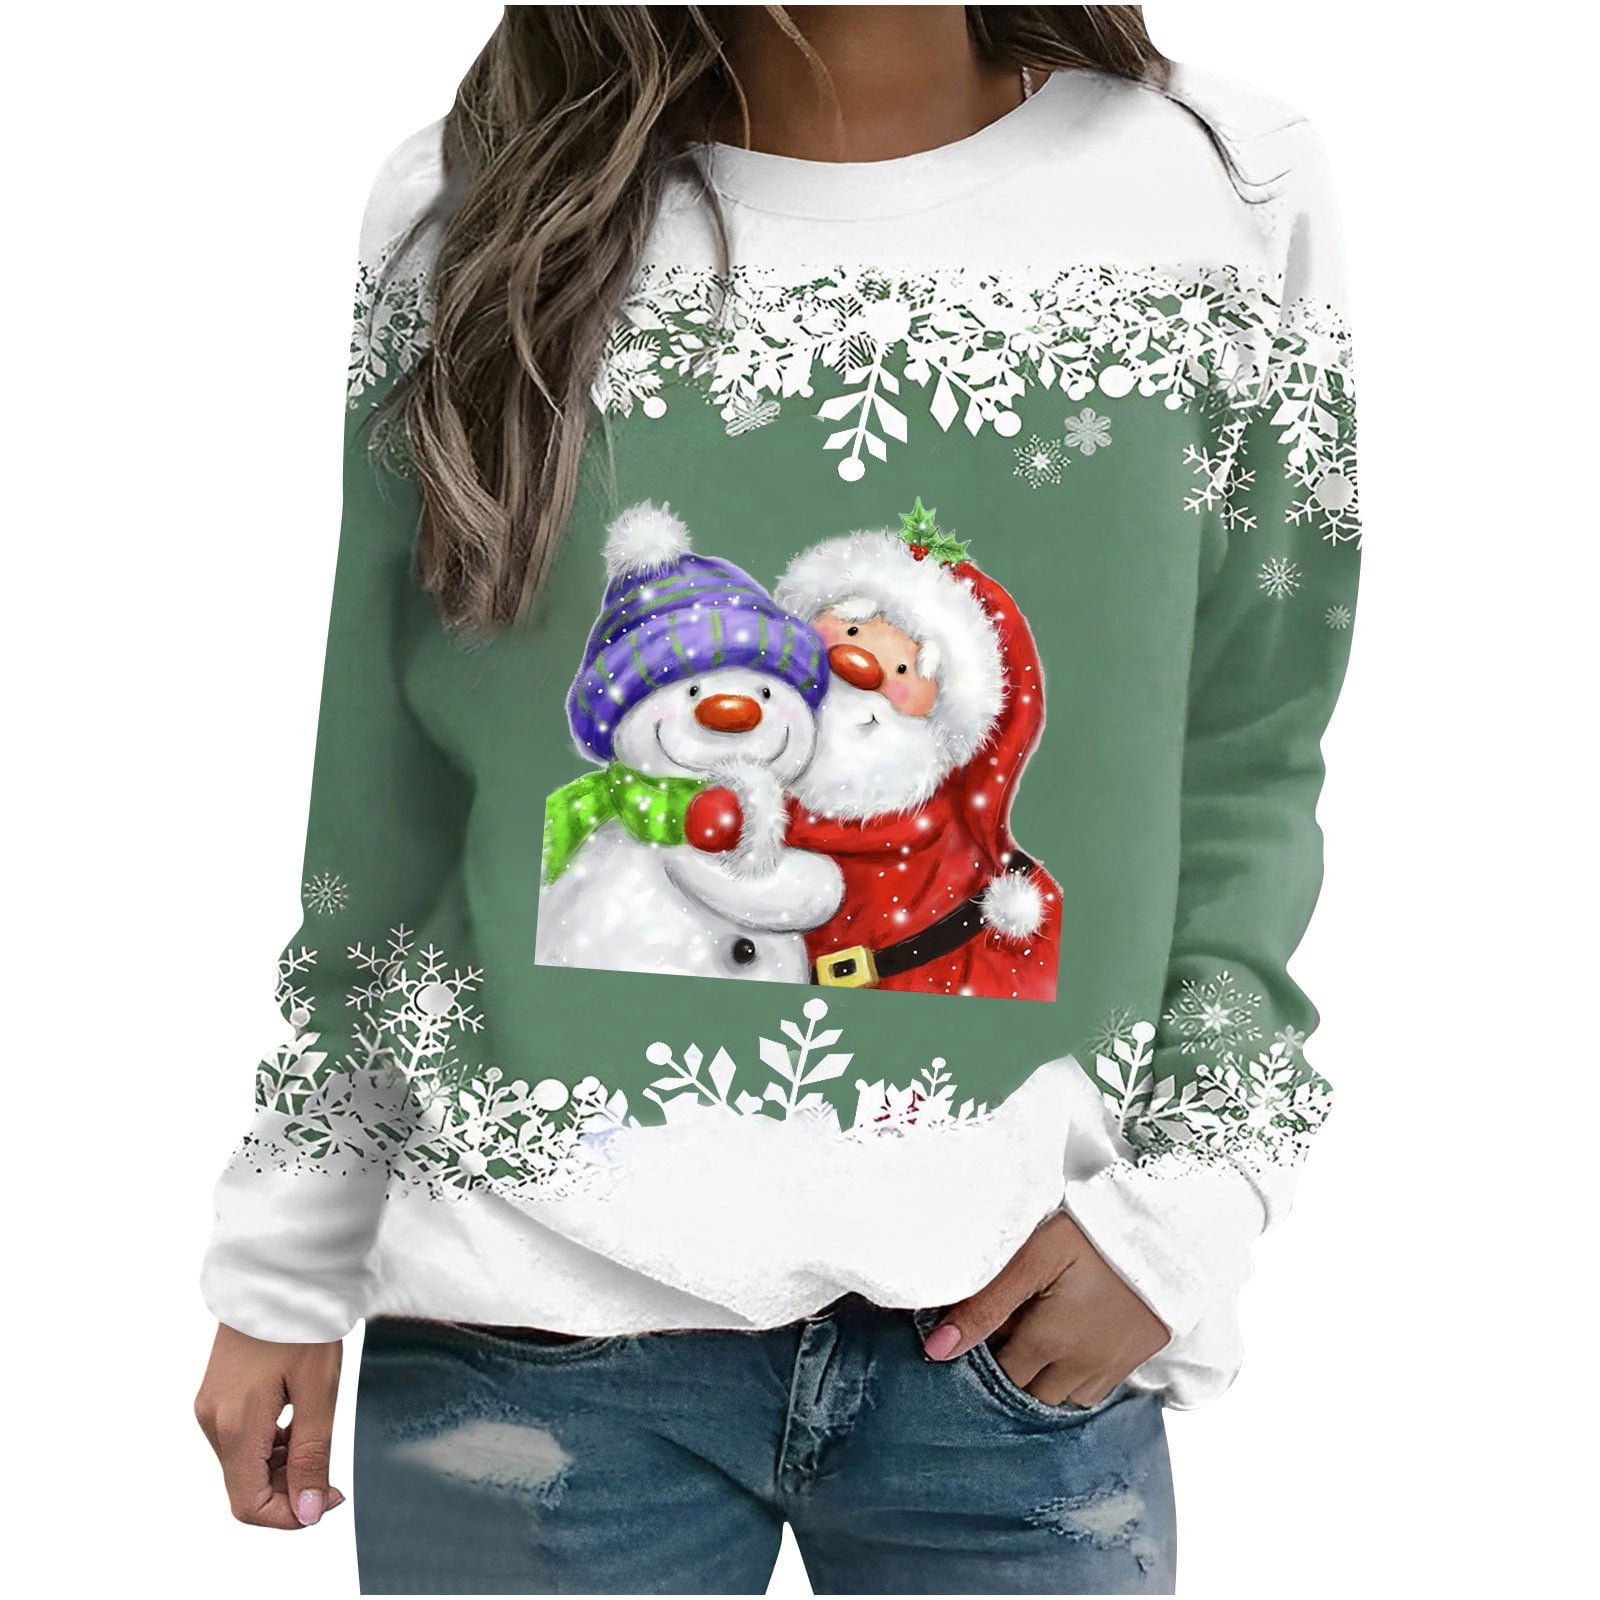 Holiday Clearance overstock items clearance Cute christmas Sweater